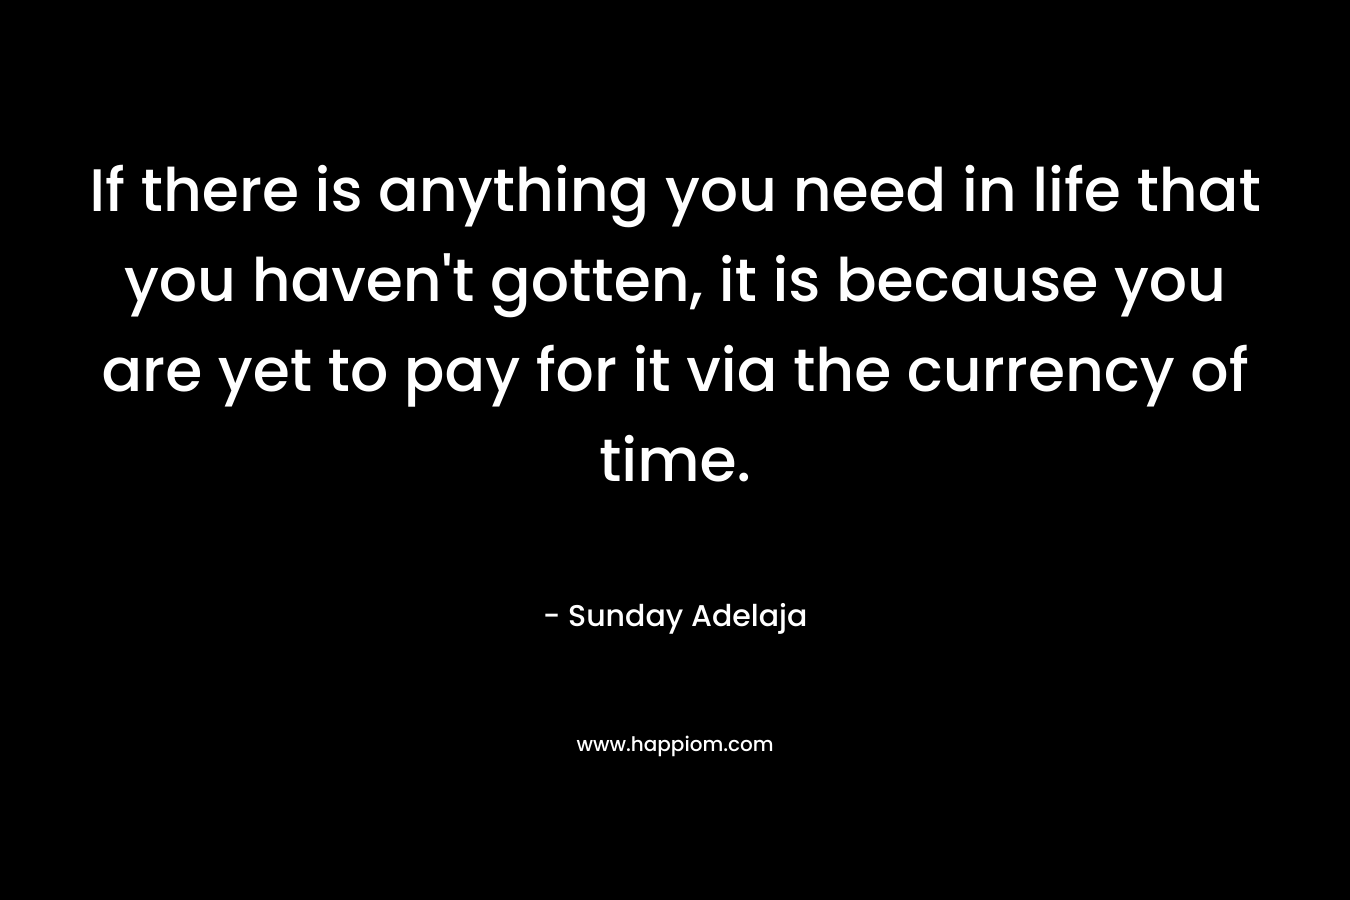 If there is anything you need in life that you haven't gotten, it is because you are yet to pay for it via the currency of time.